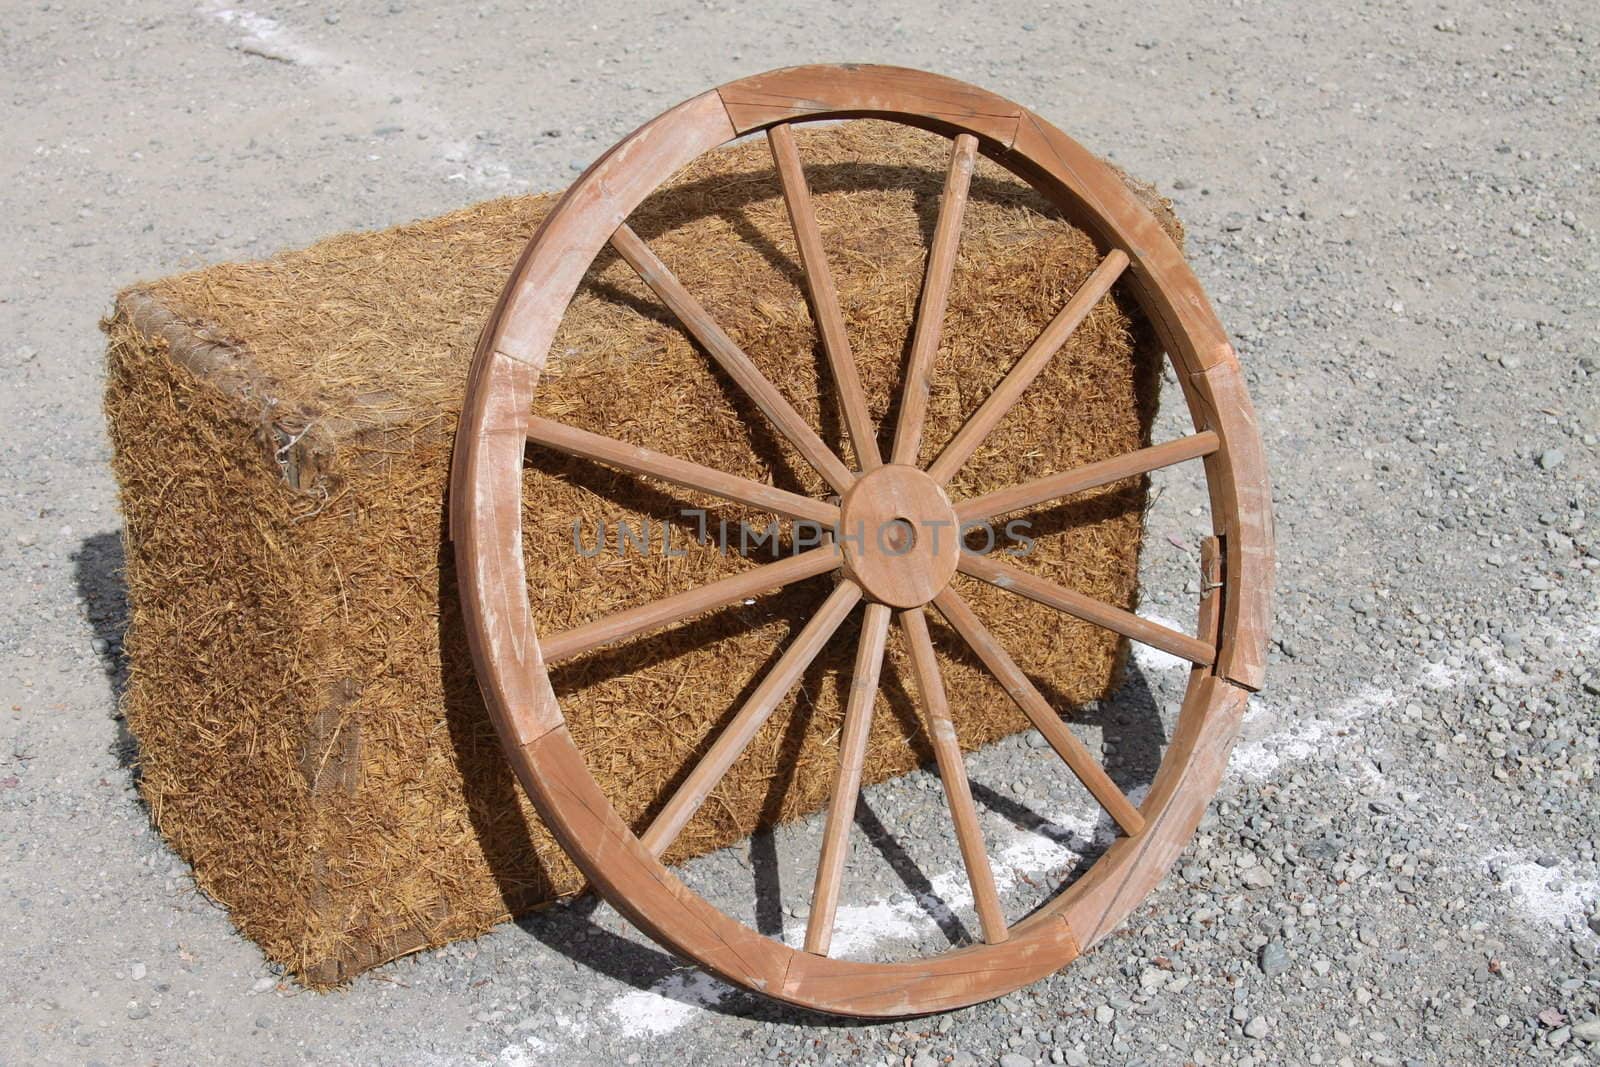 Wagon wheel next to a bale of hay.